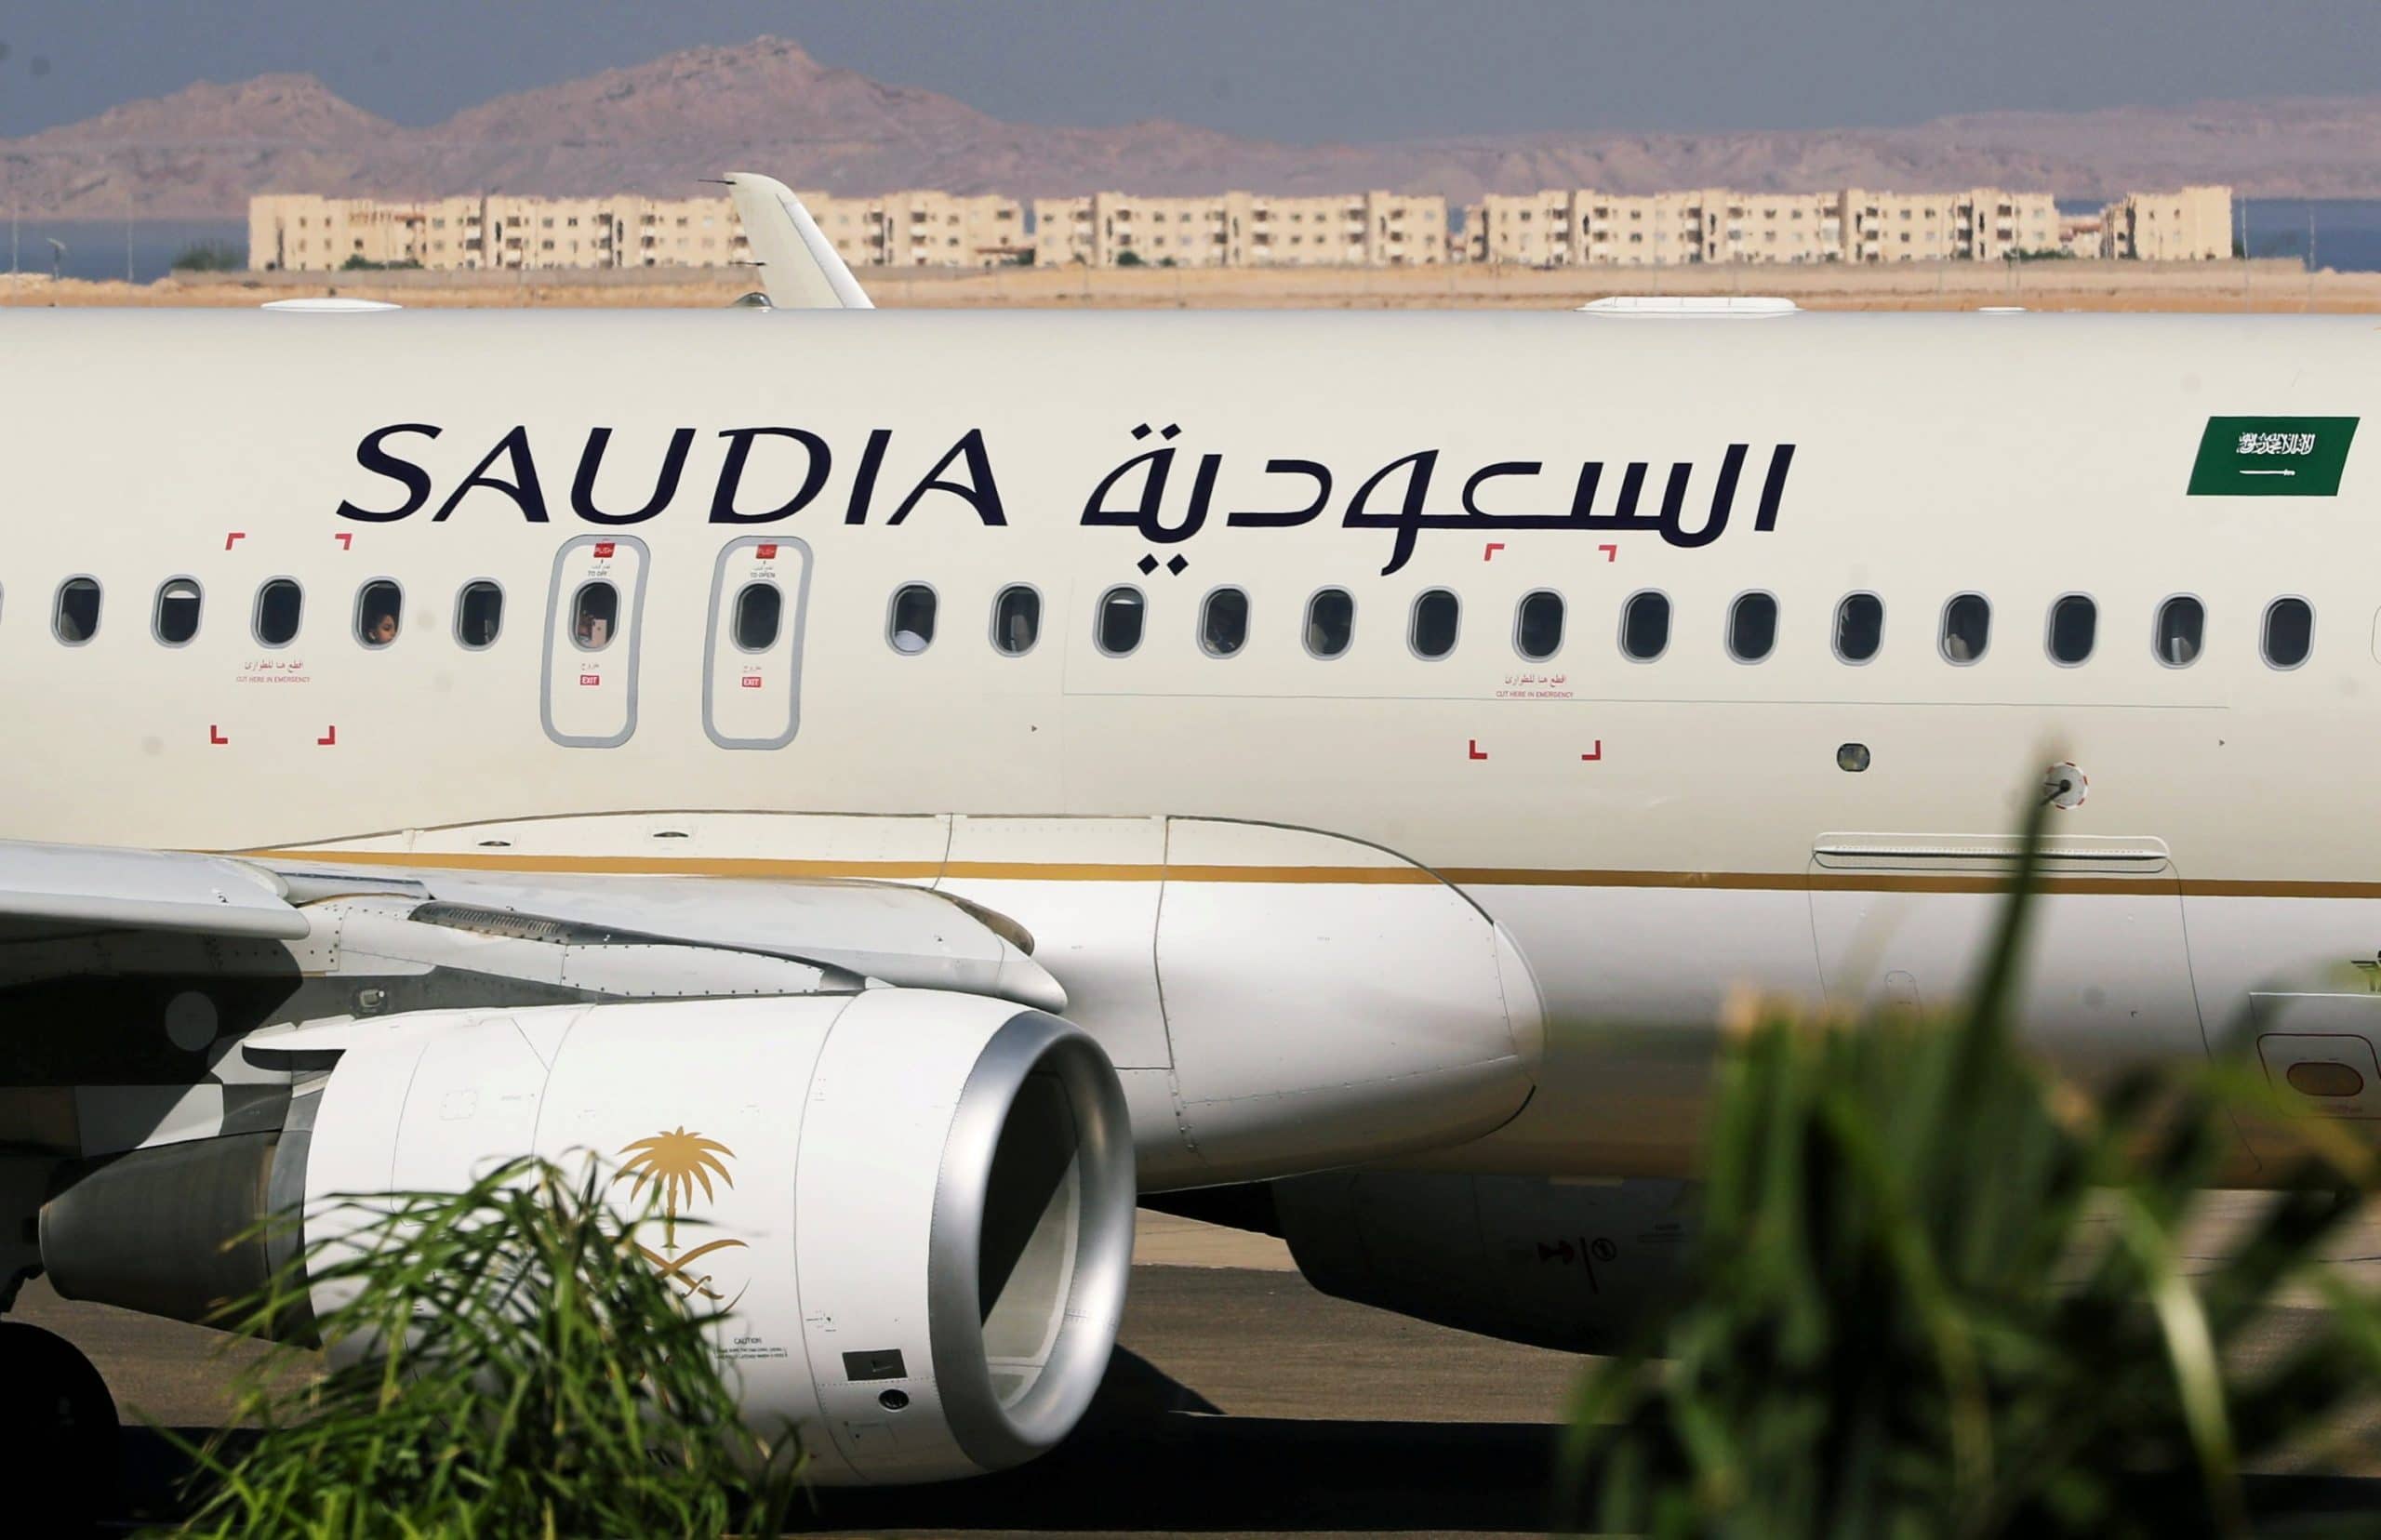 Saudia had its first Flight to Istanbul after a two-year break